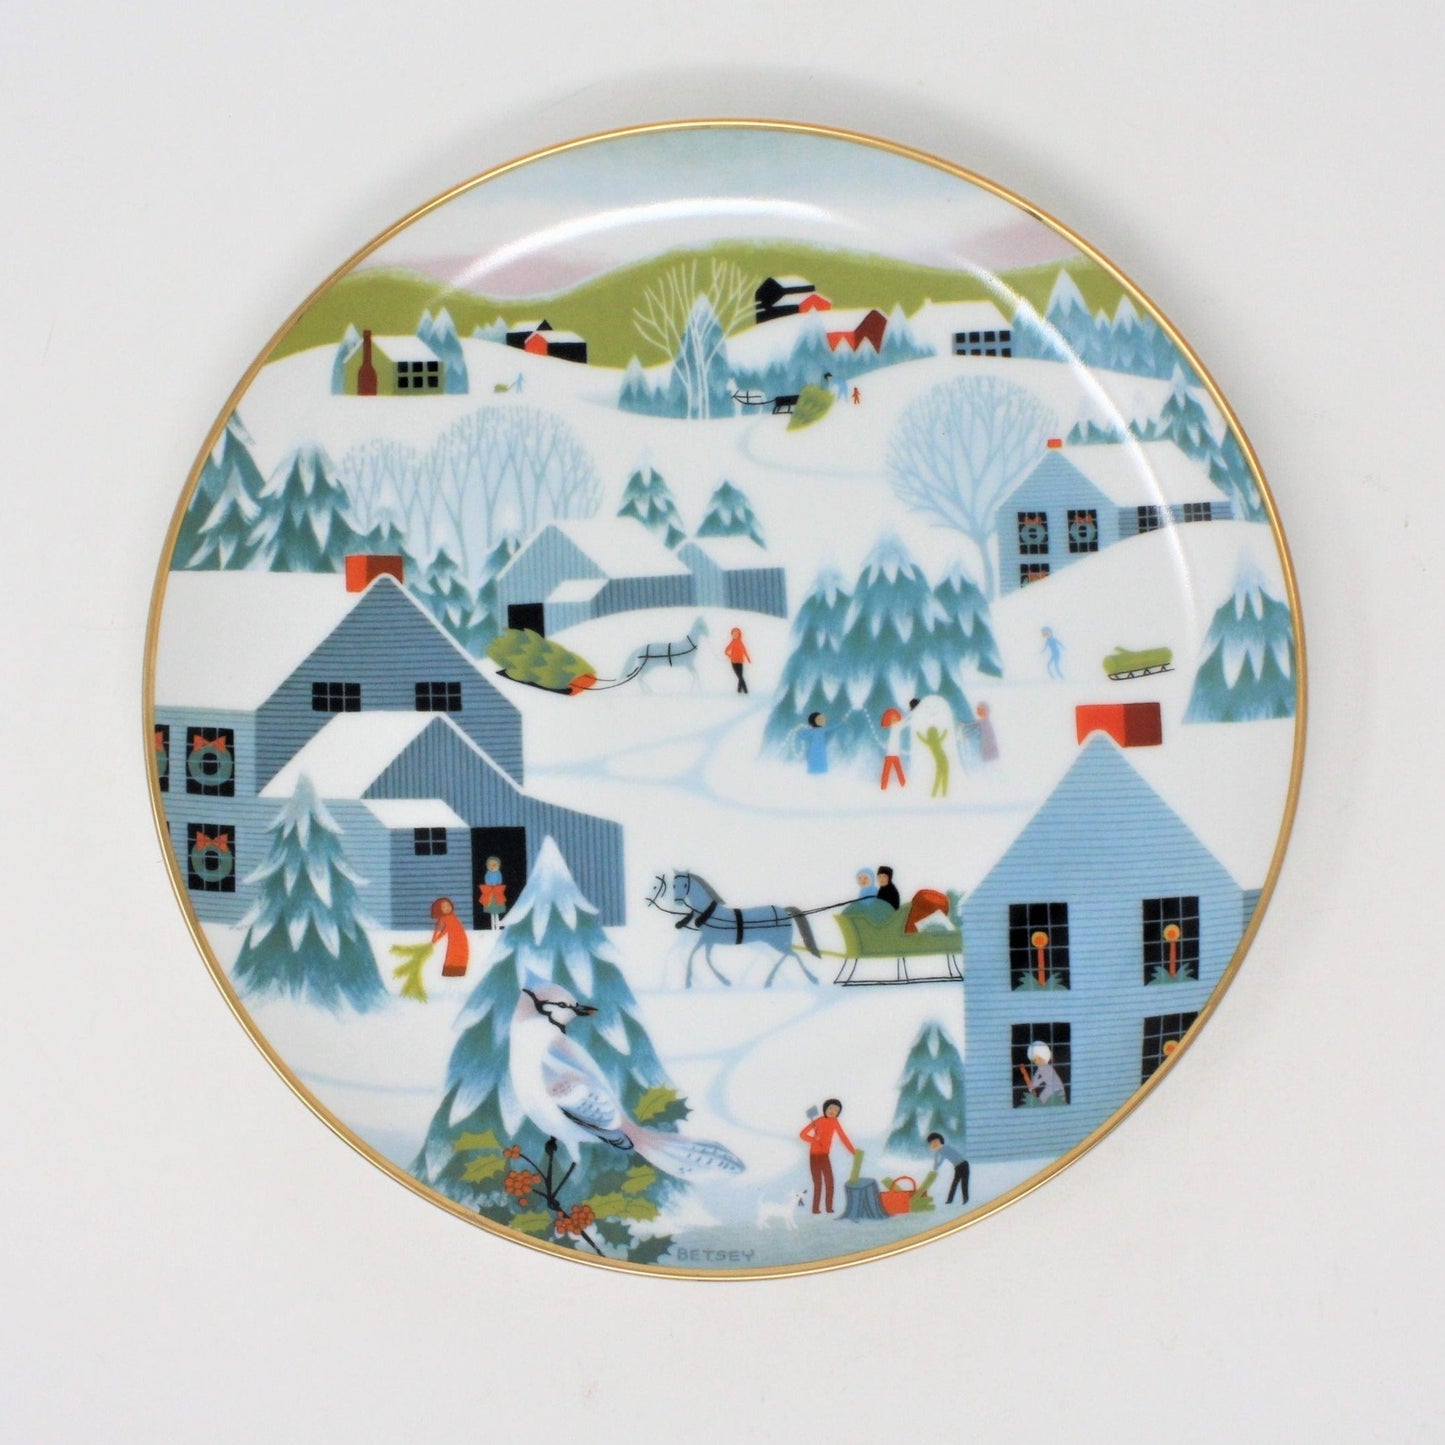 Decorative Plate, Betsey Bates, Home for Christmas, Vintage 1982